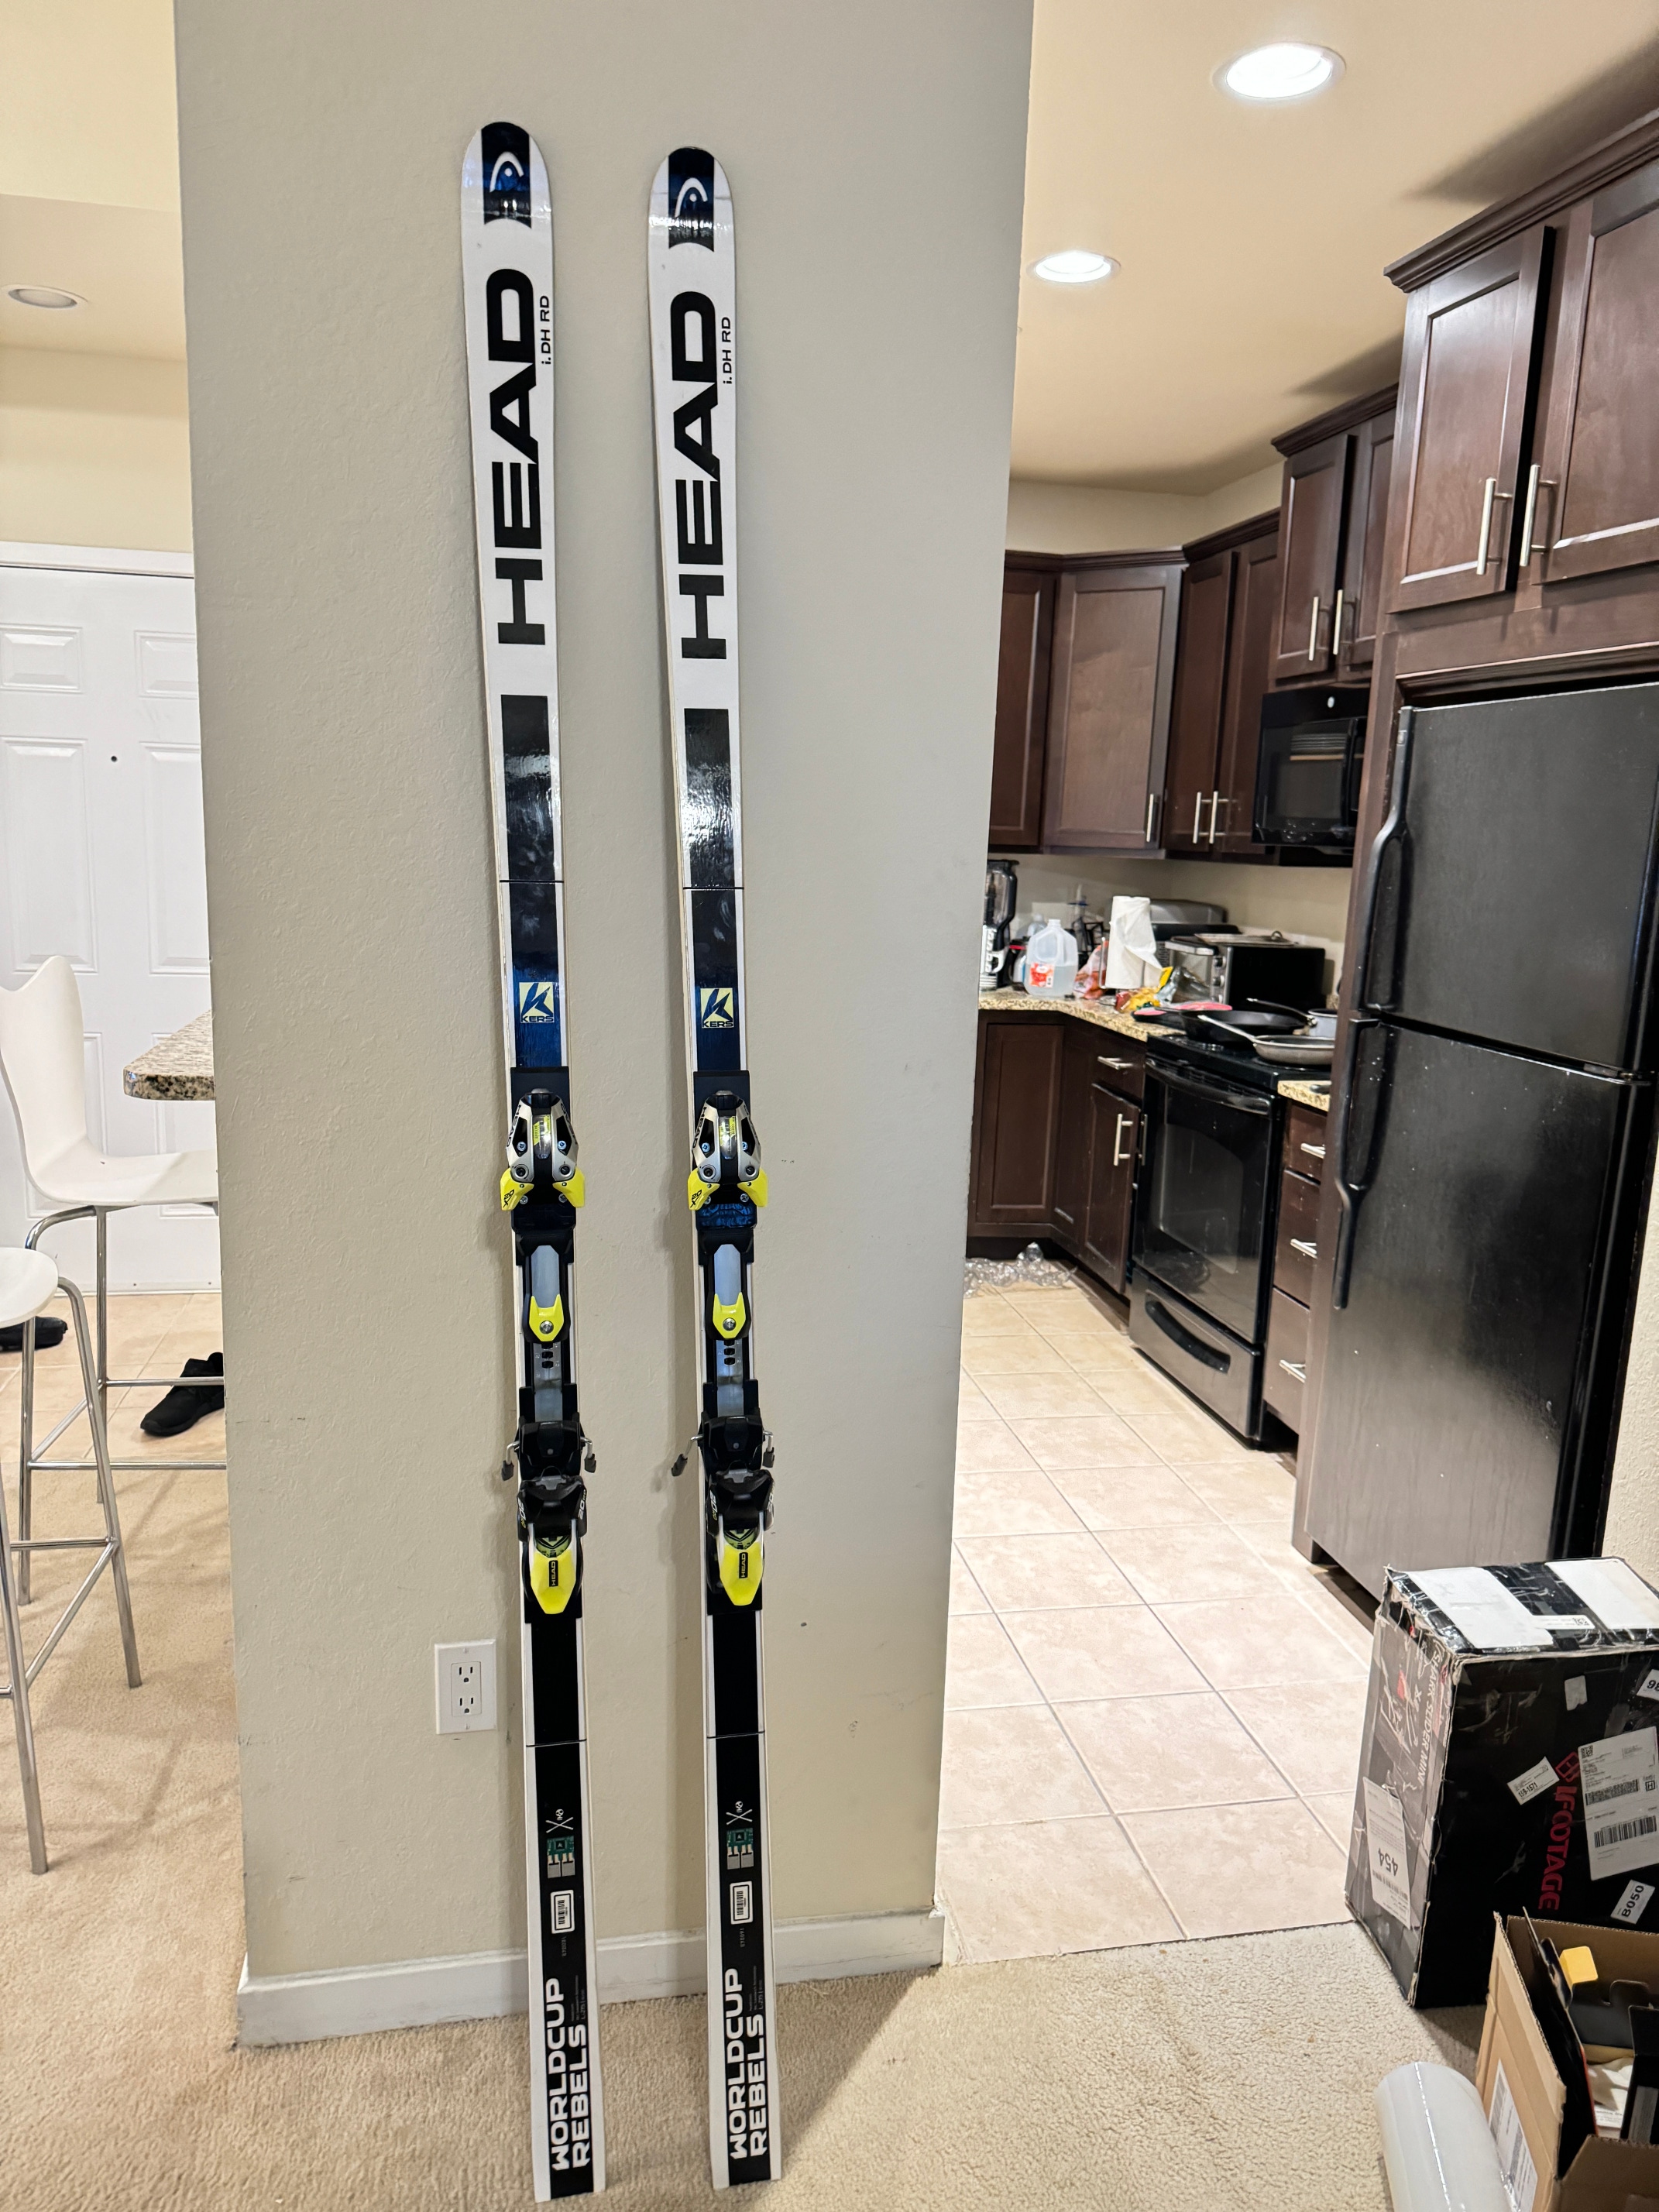 New HEAD 215 cm Racing World Cup Rebels i.DH FIS DH downhill Skis With Bindings